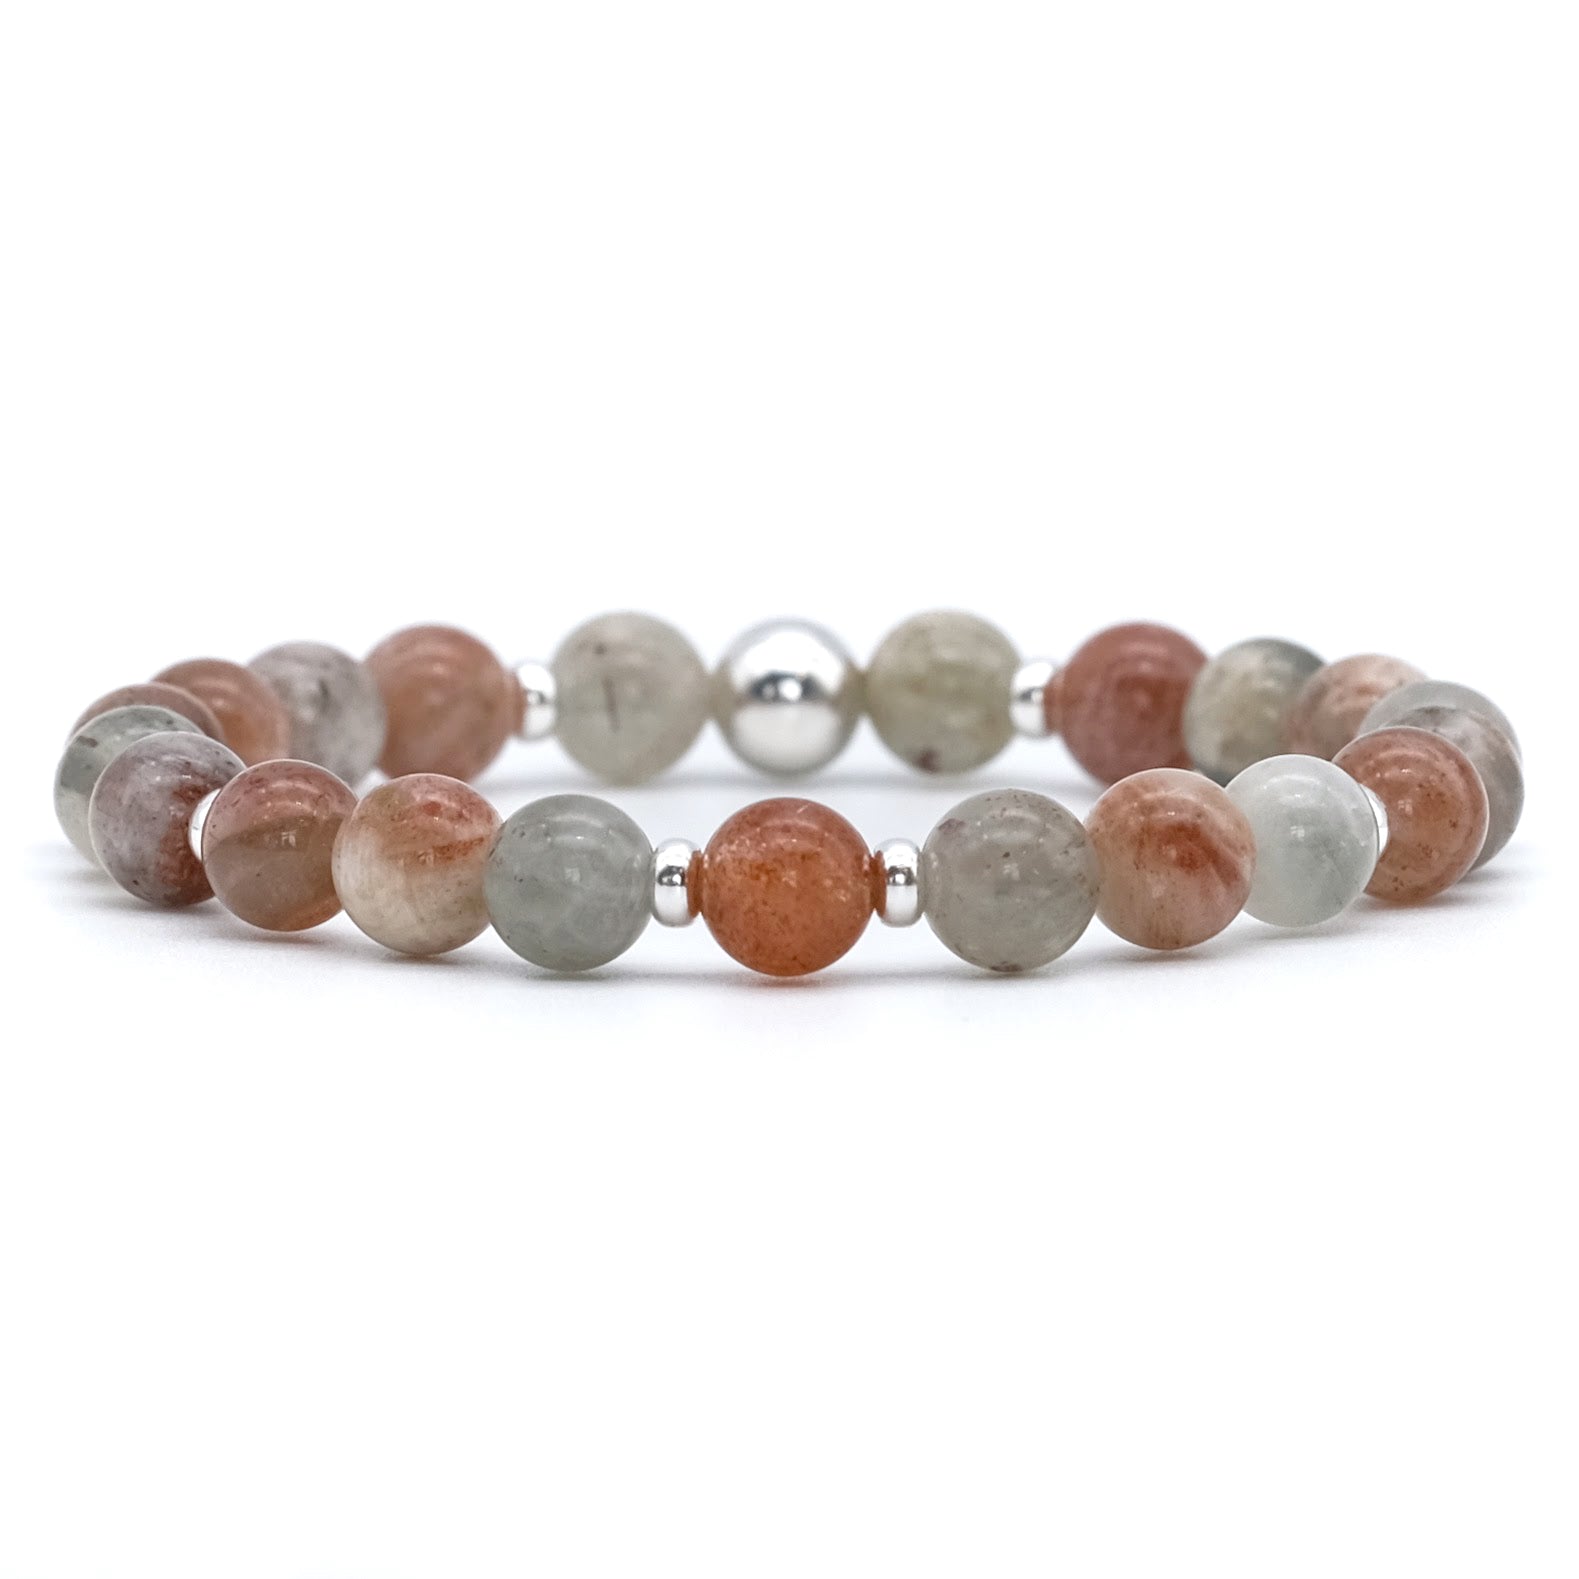 Arusha sunstone gemstone bracelet in 8mm with 925 silver accessories